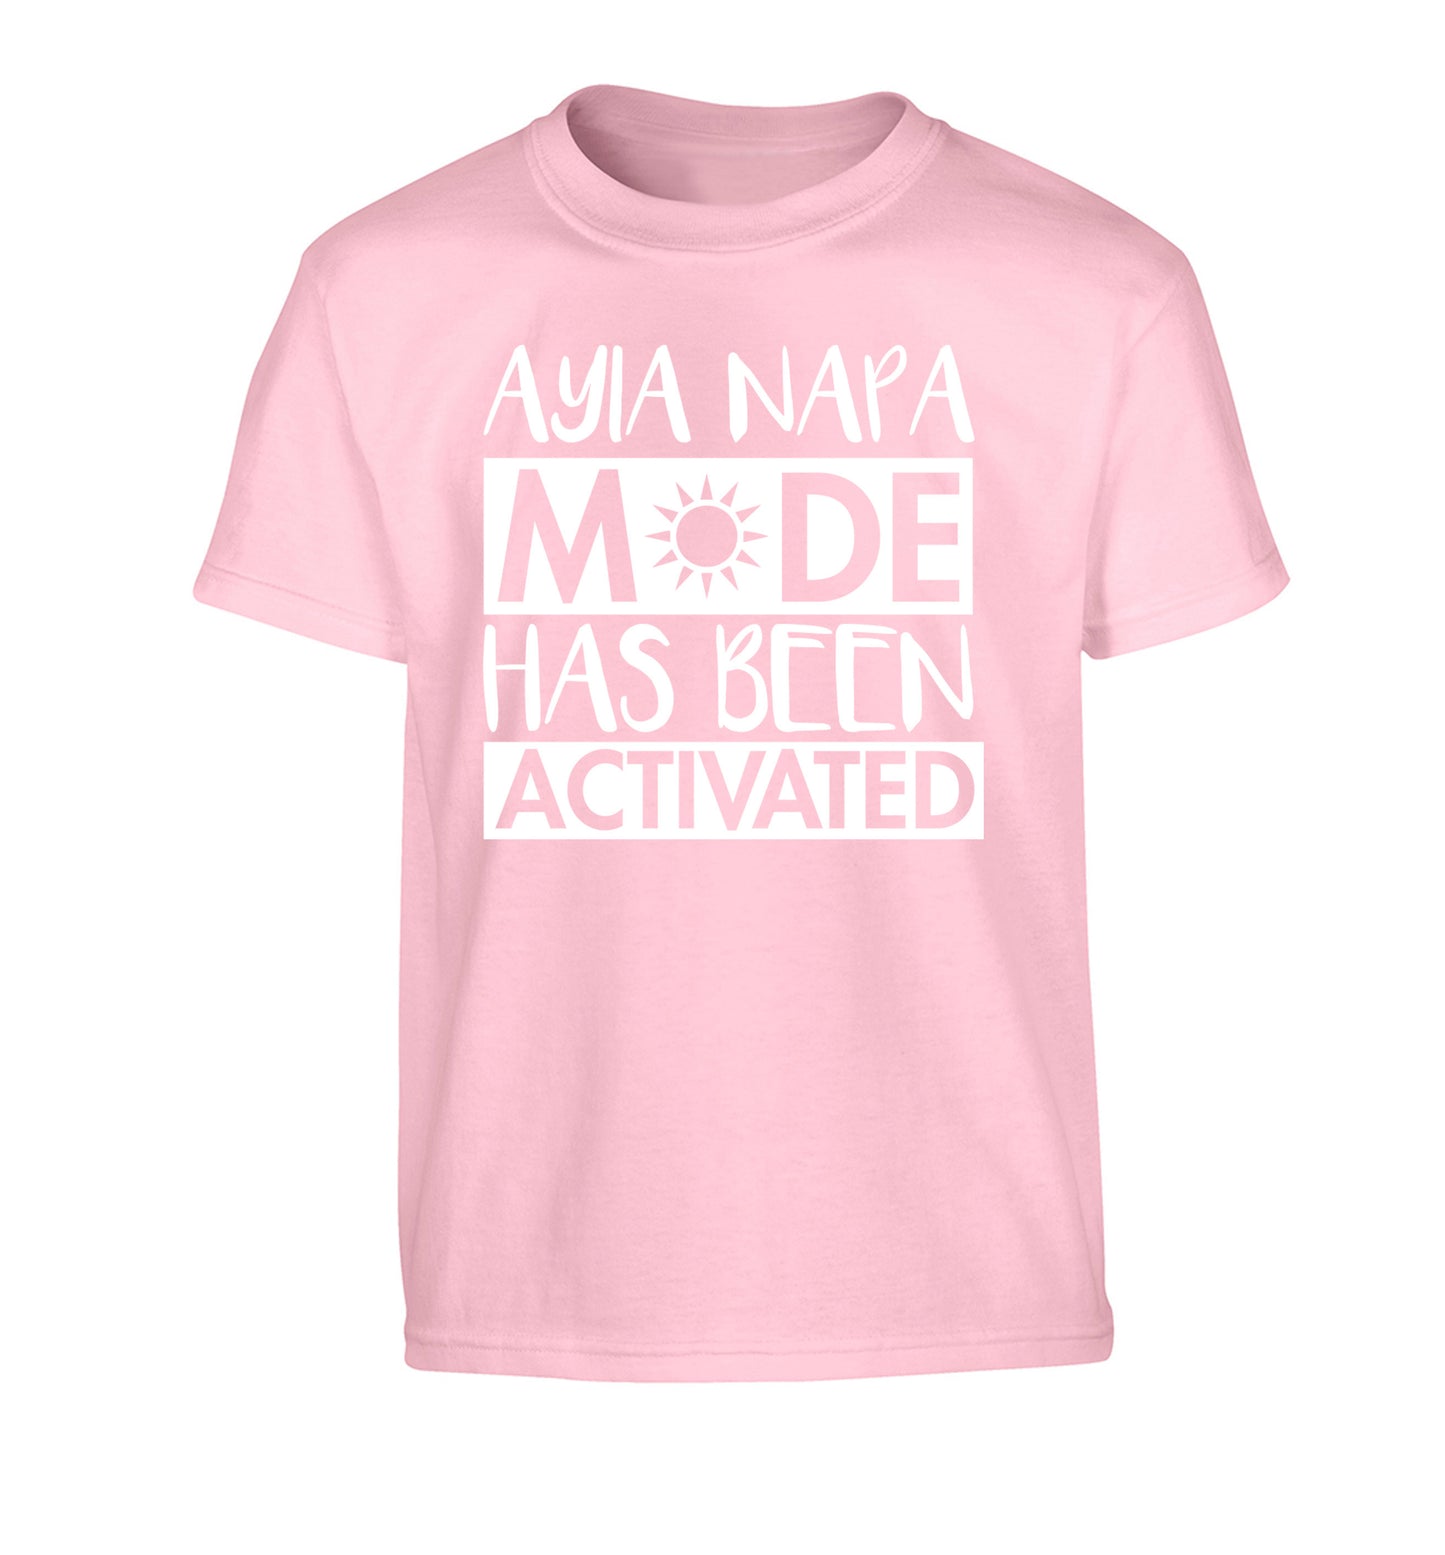 Aiya Napa mode has been activated Children's light pink Tshirt 12-14 Years